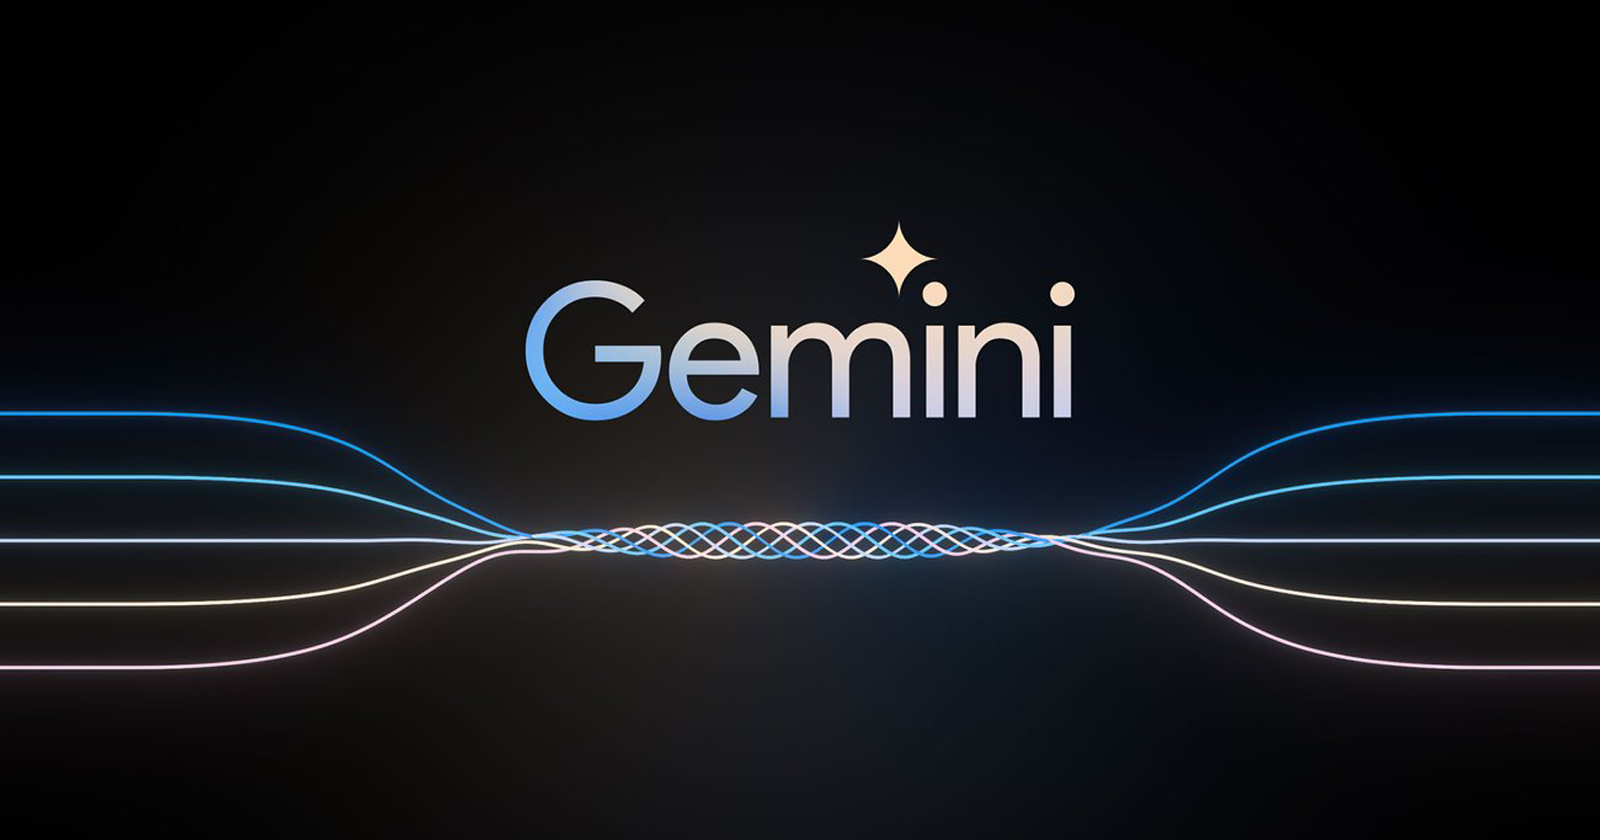 Google Gemini is coming to European and Asian countries!